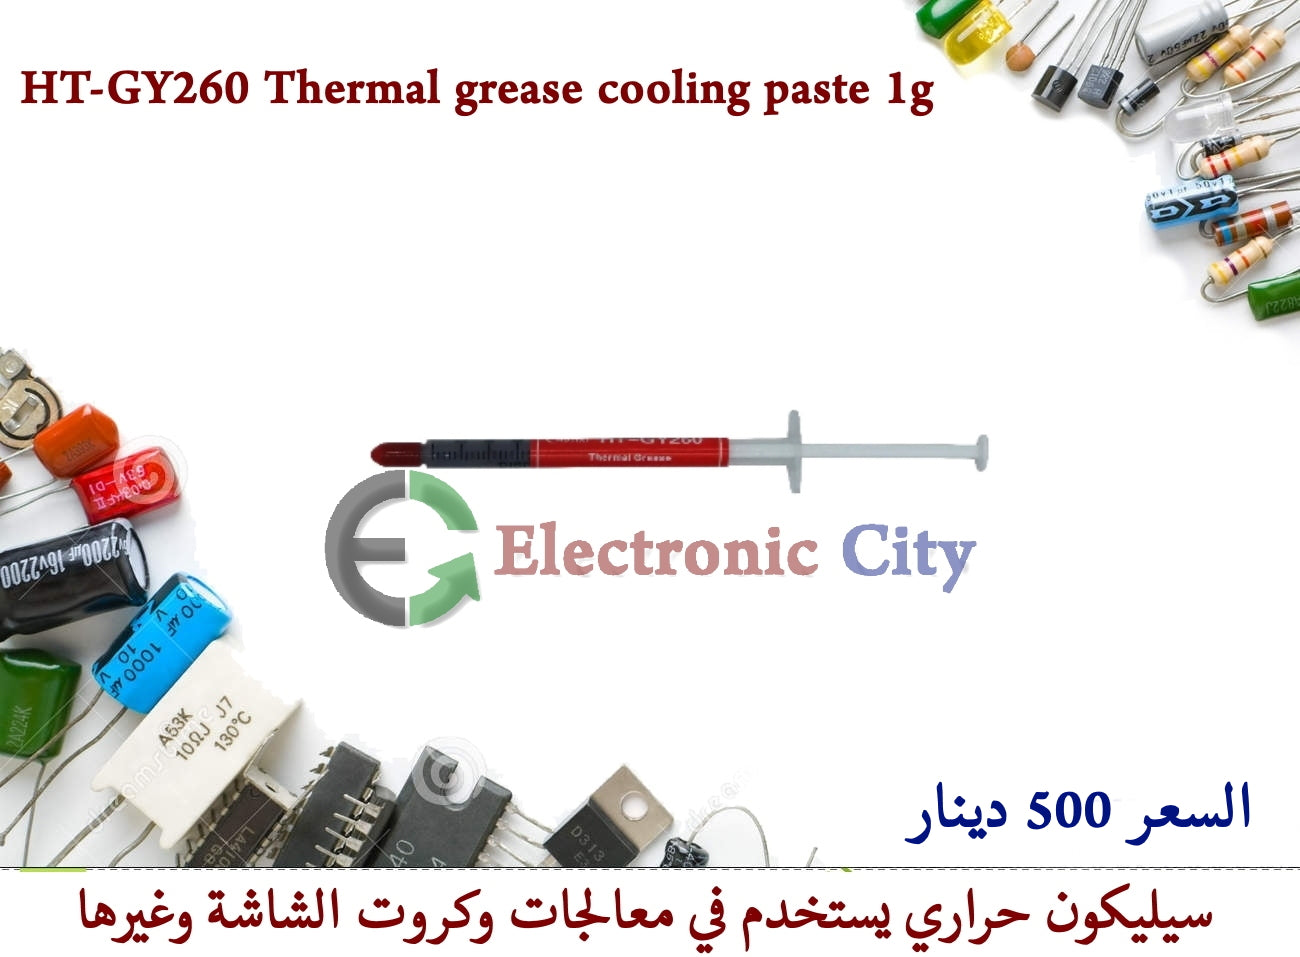 HT-GY260 Thermal grease cooling paste 1G